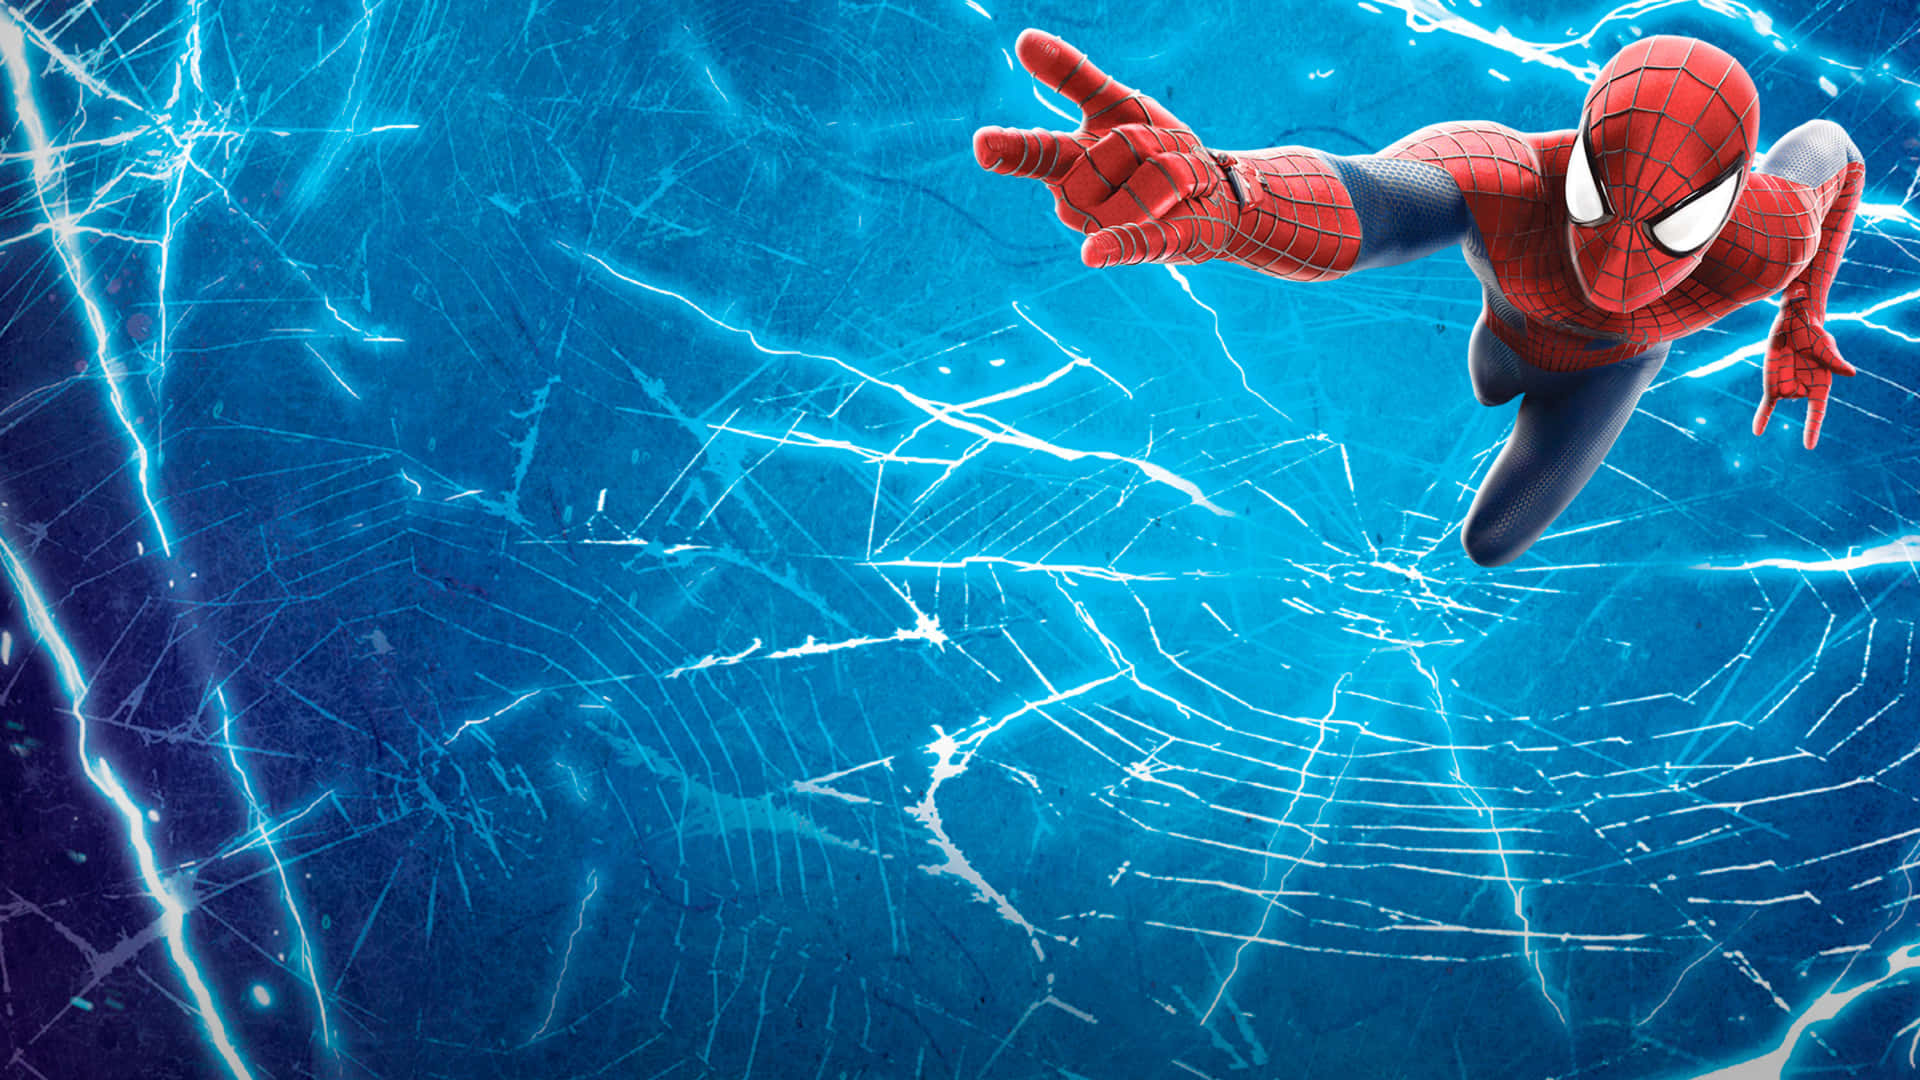 Spectacular Spider-Man Blue in Action Wallpaper